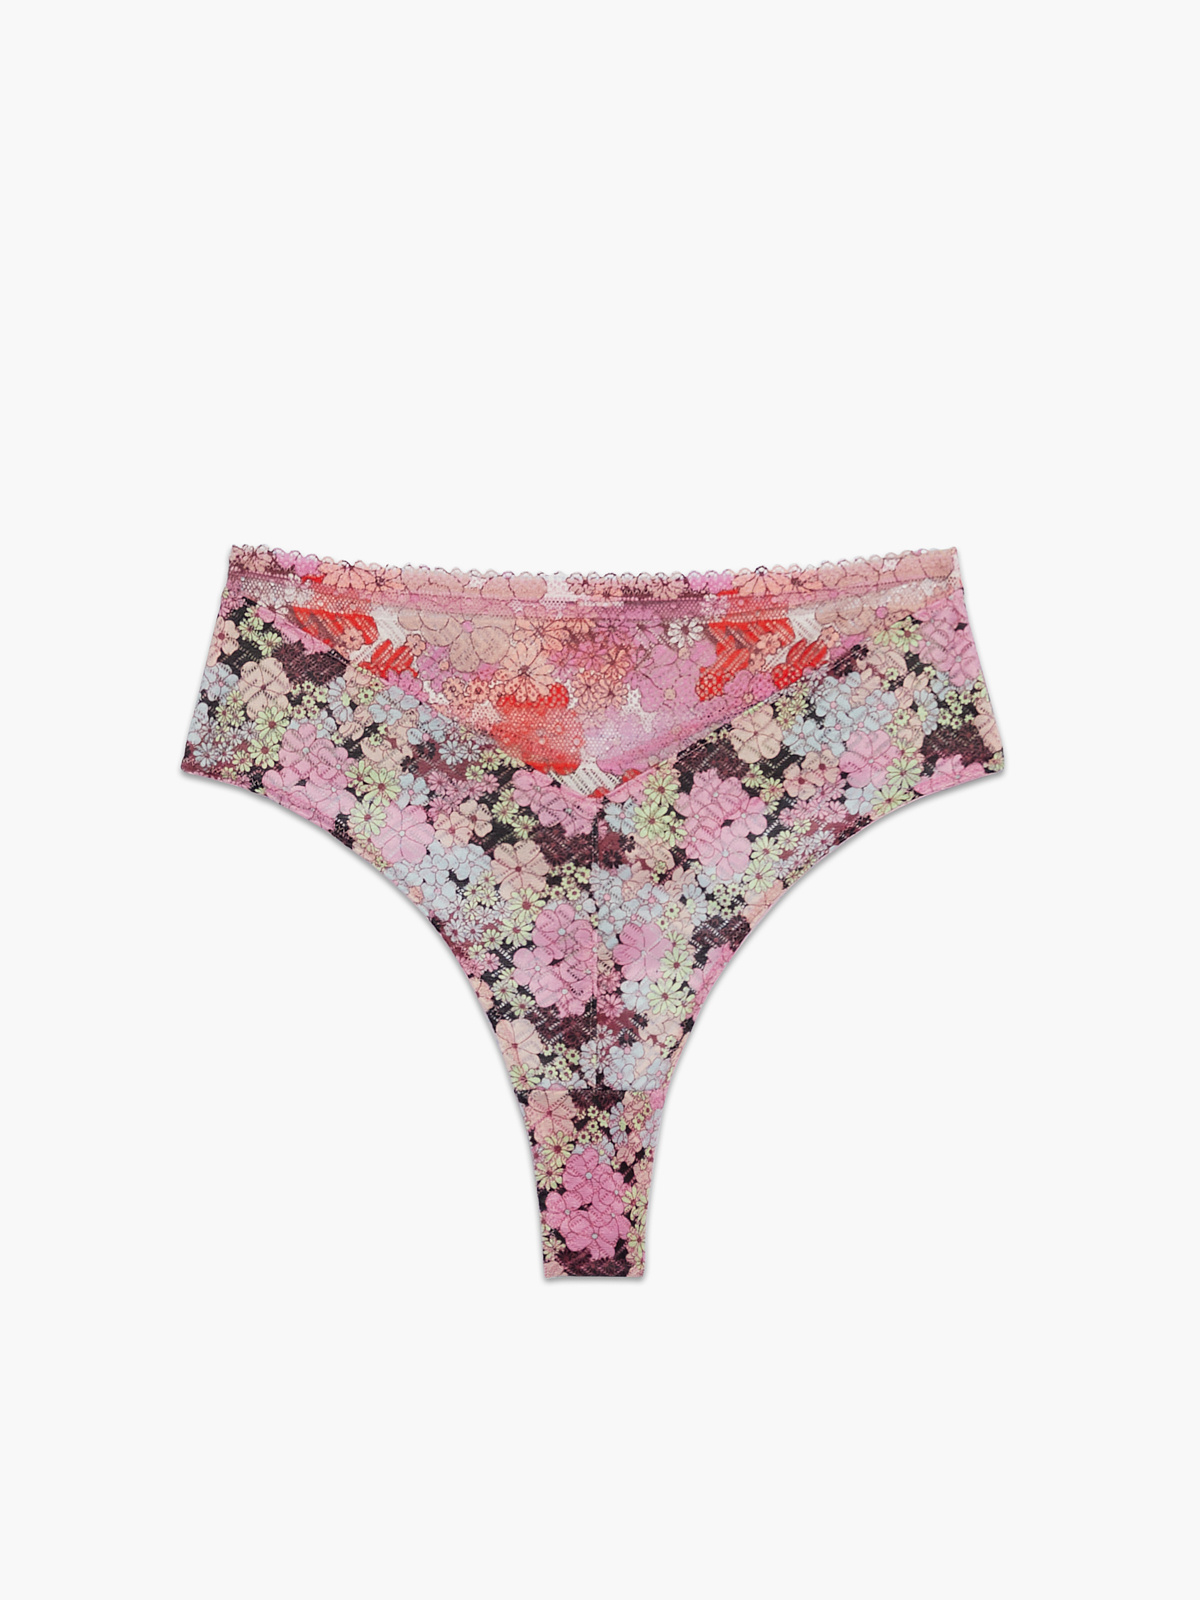 Penthouse Sweet Lace High-Waist Thong Panty in Multi & Pink | SAVAGE X ...